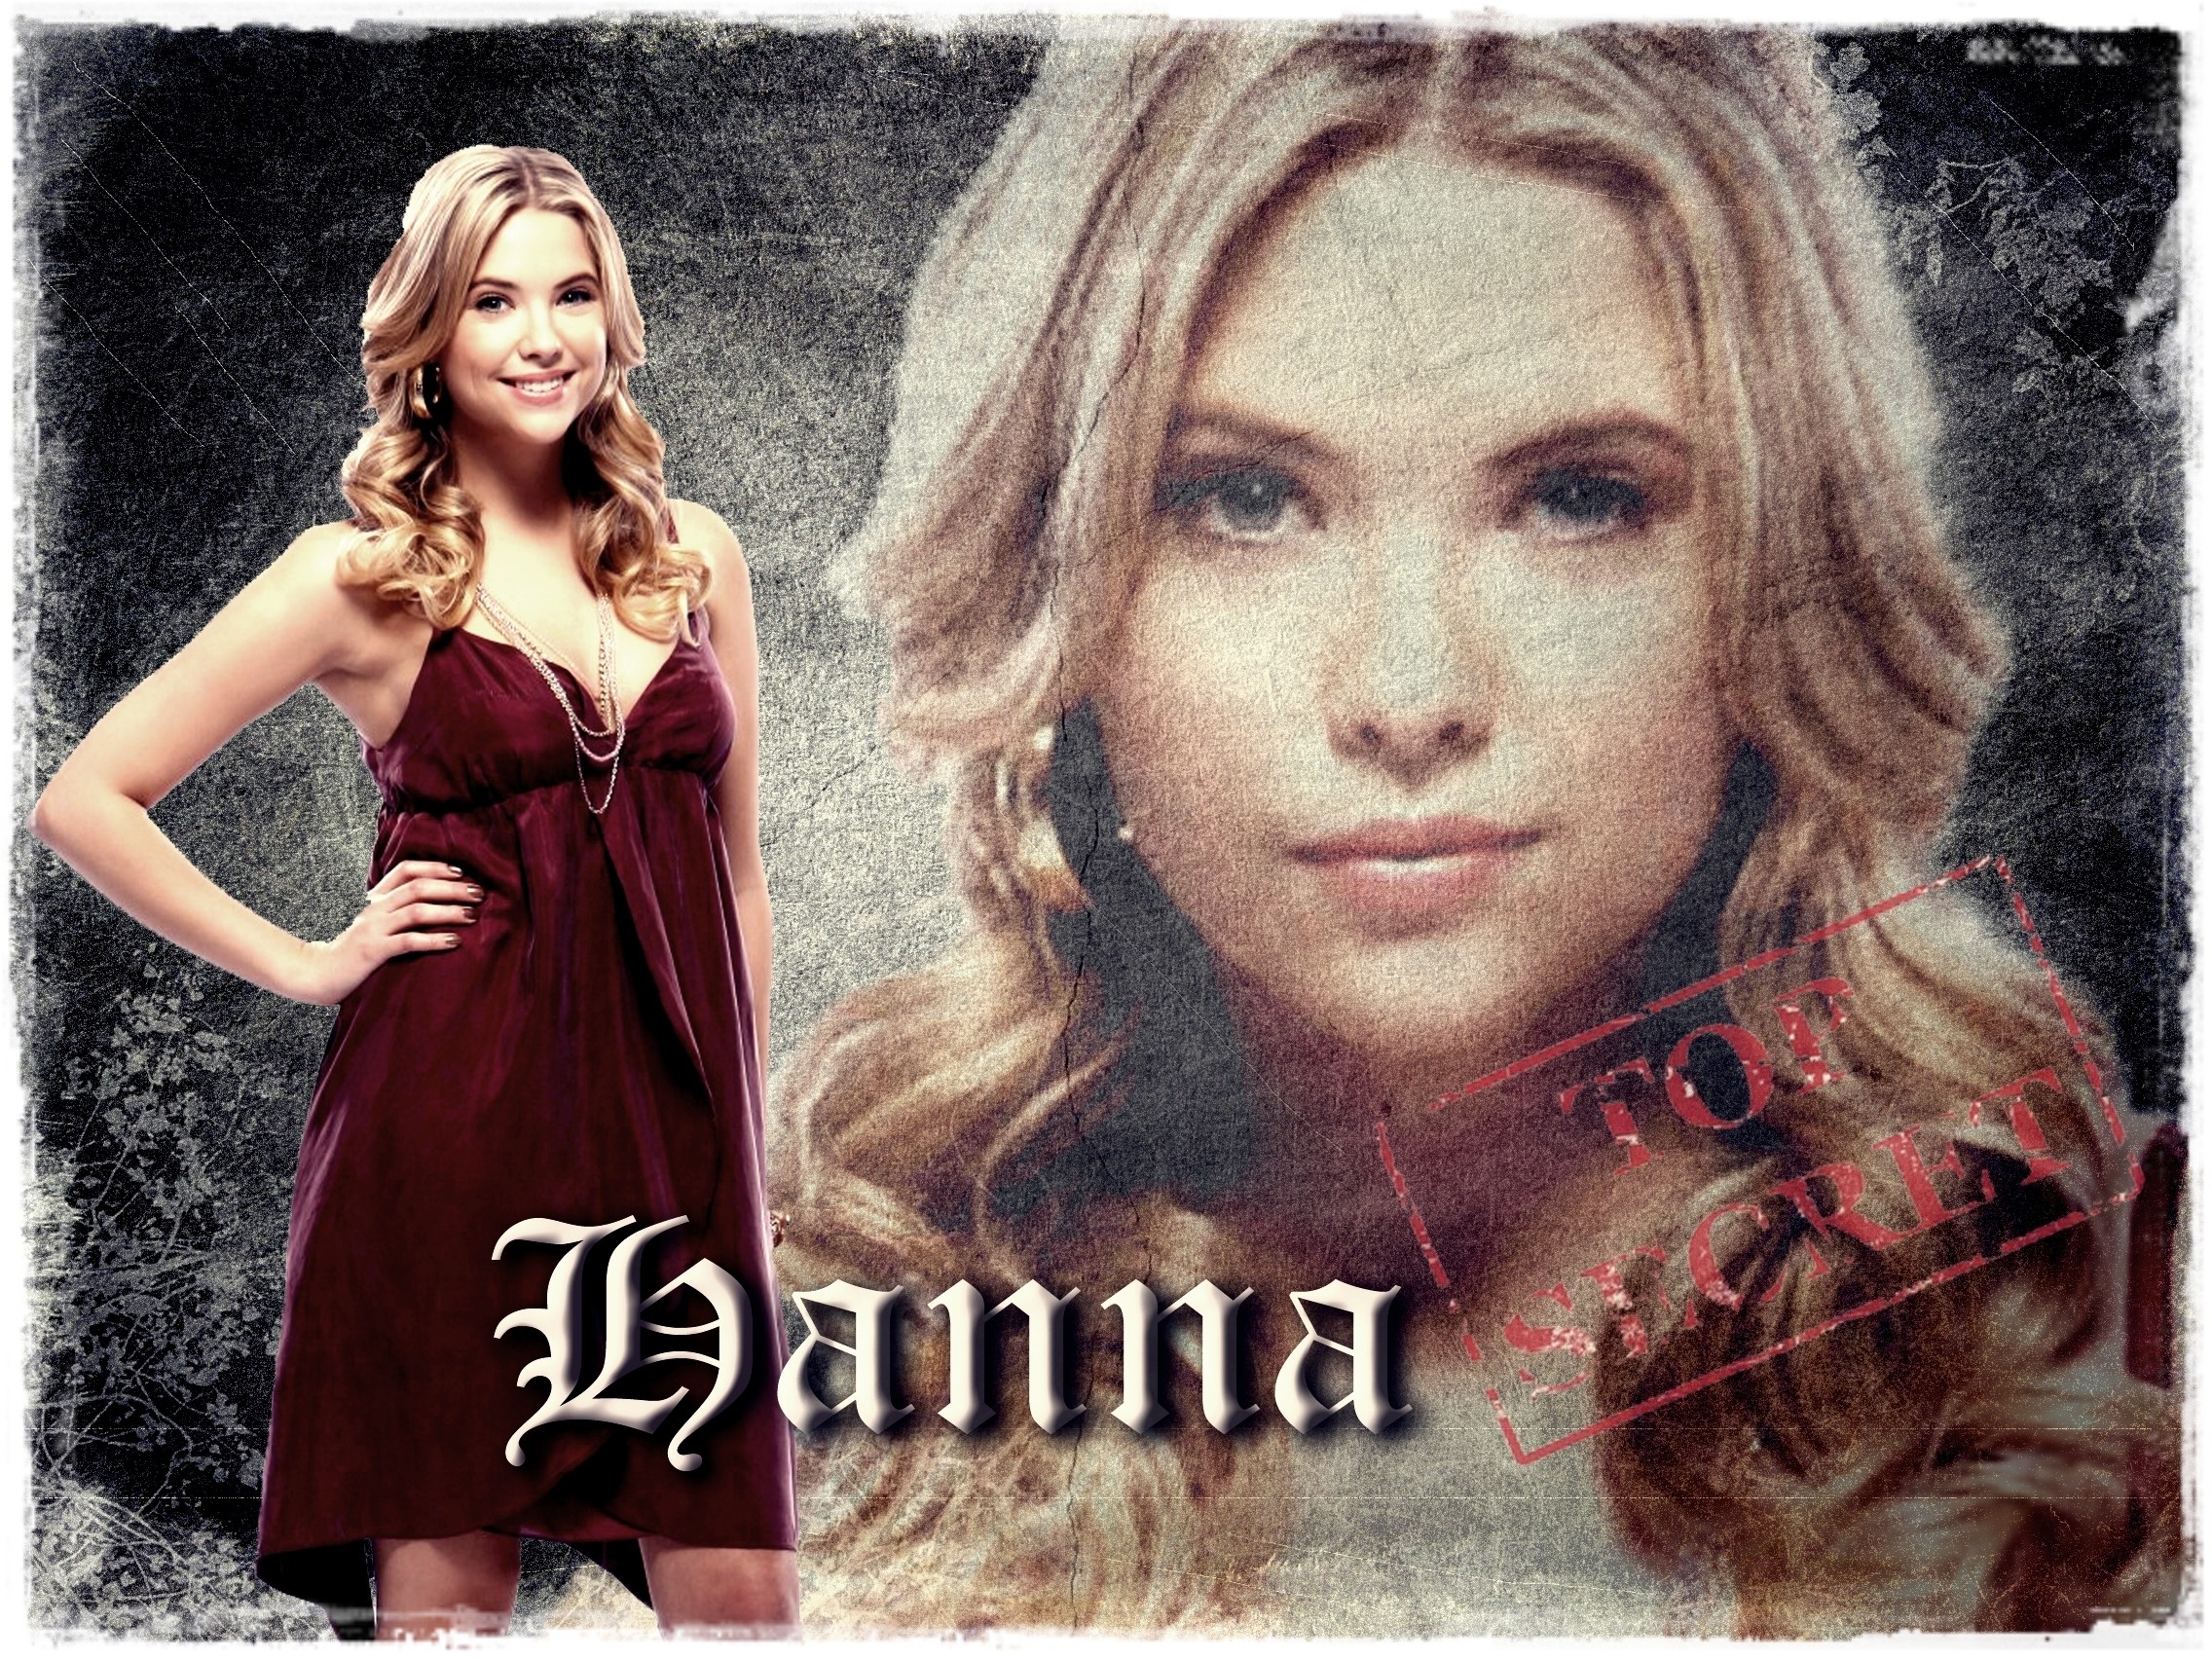 2272x1704 One of Pretty Little Liars main characters Hanna c; She is pretty and has  style